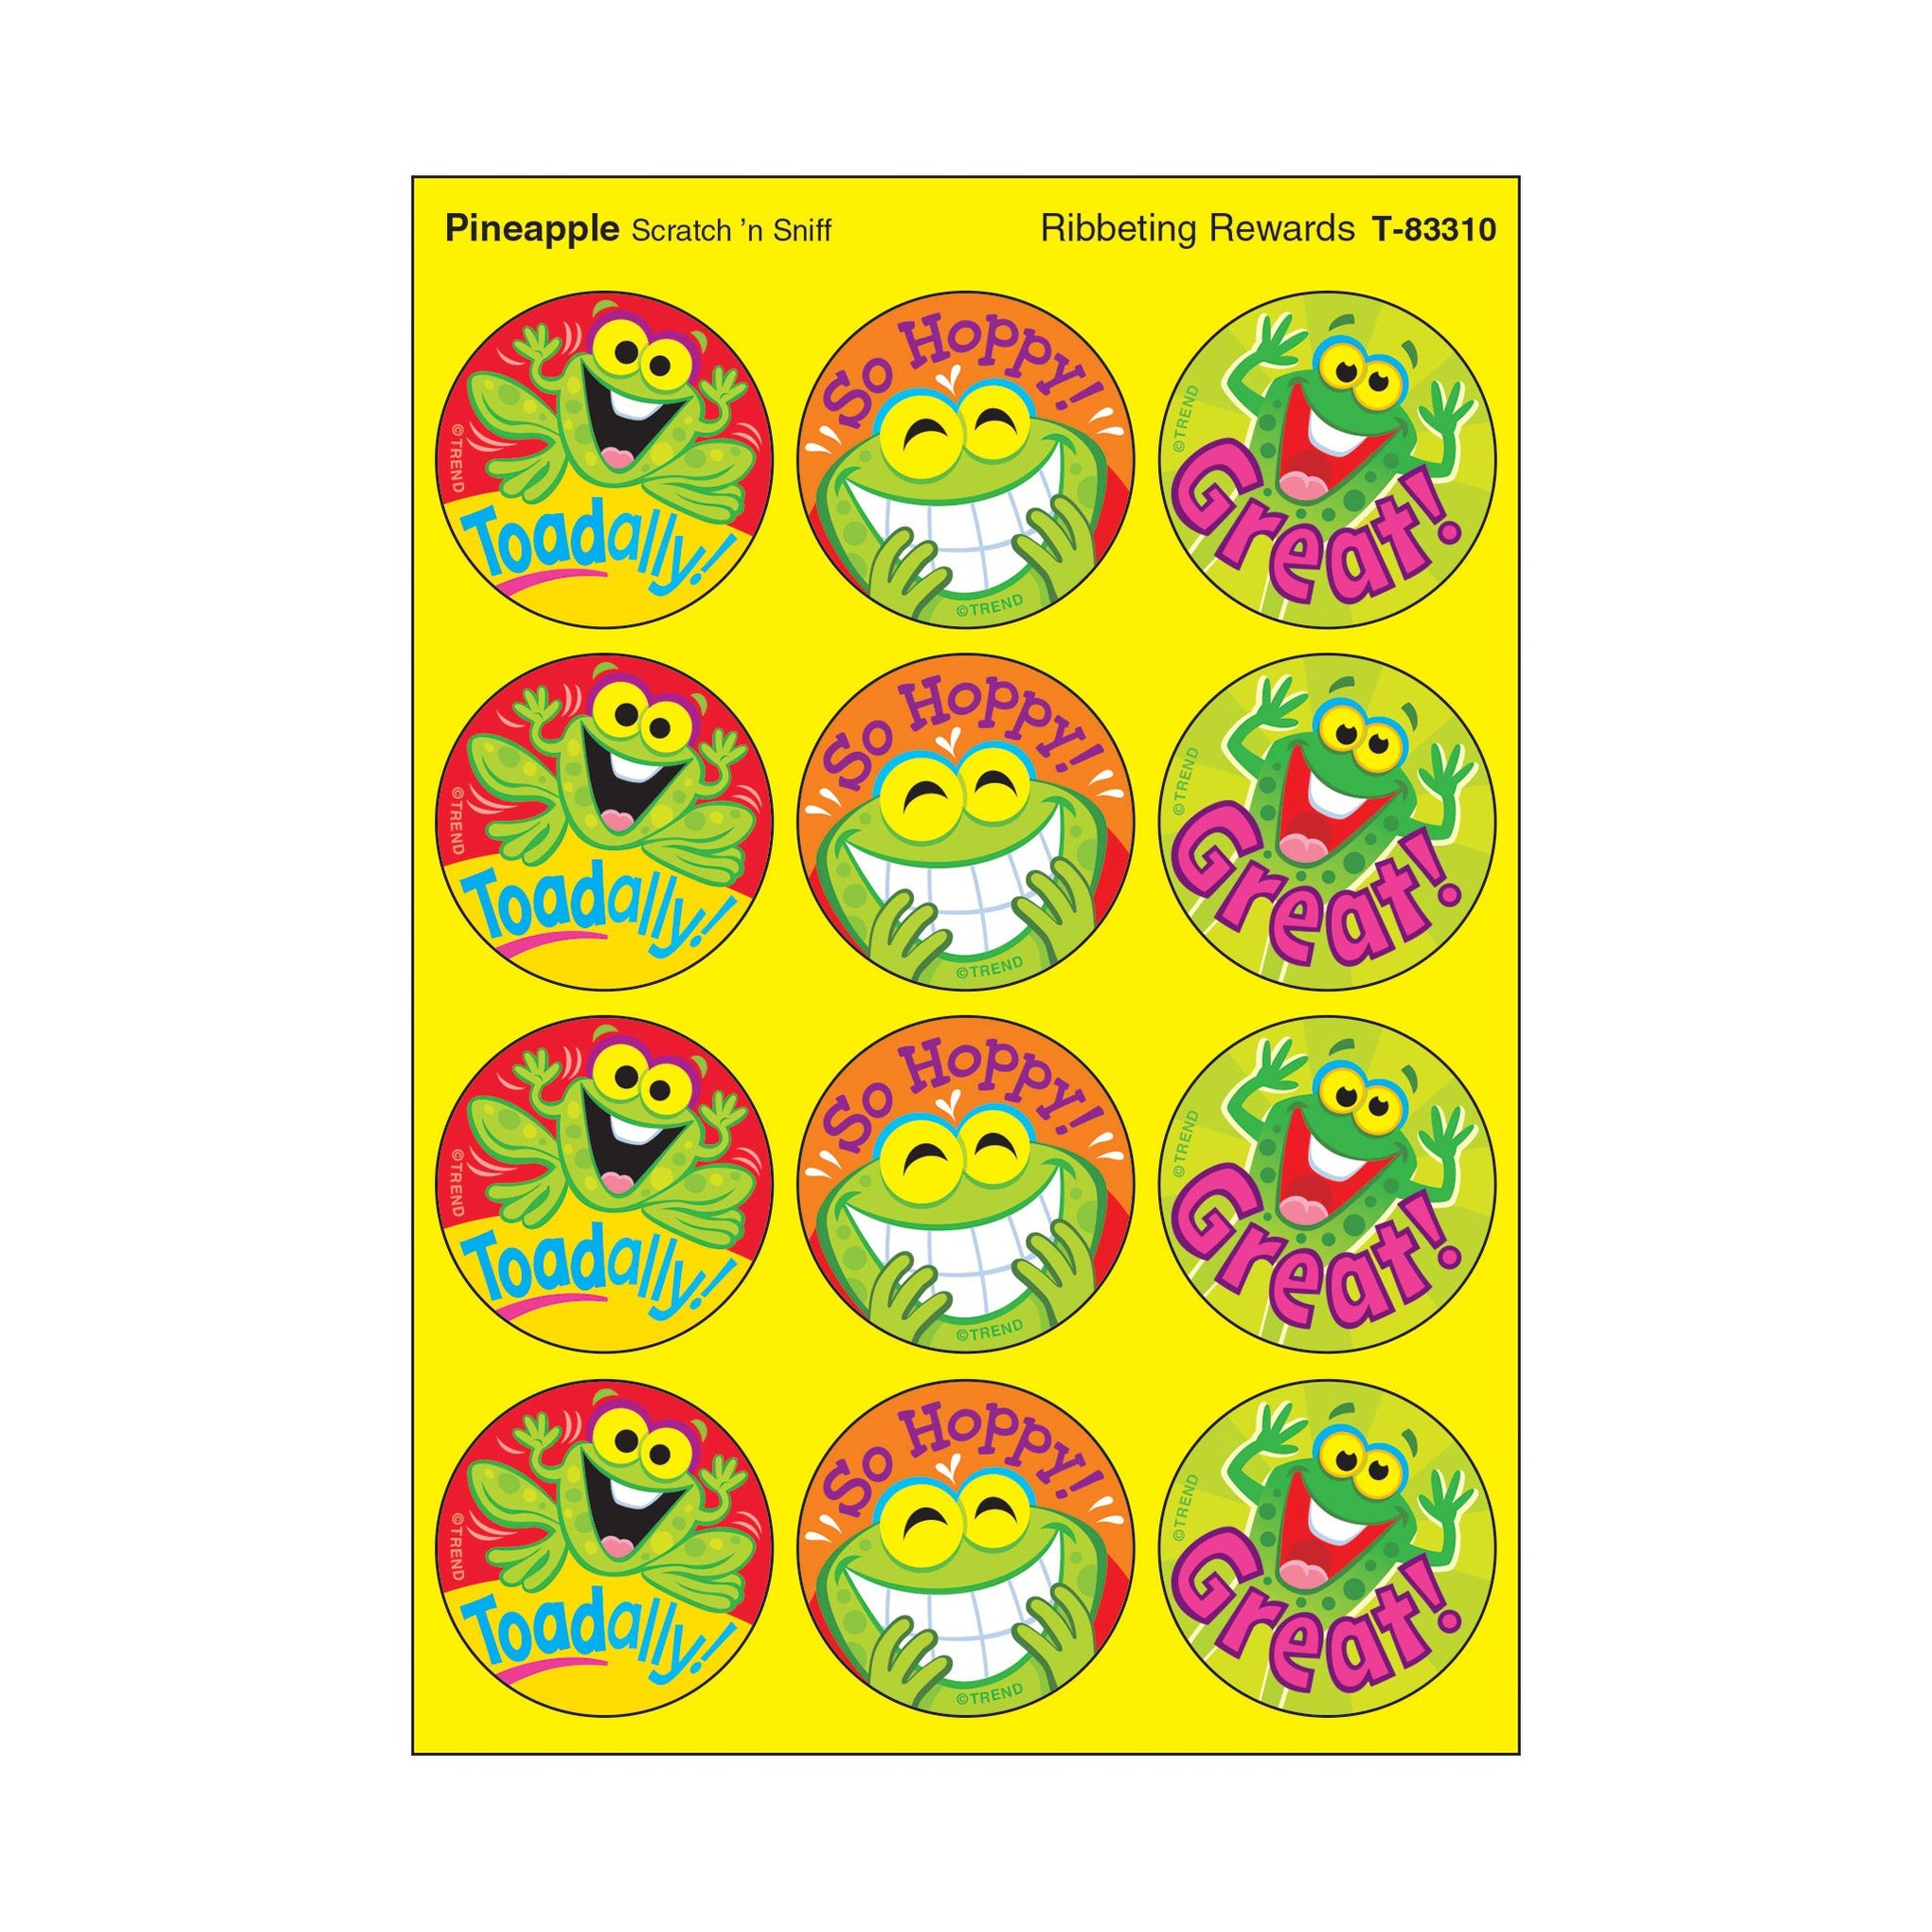 Scratch Sniff Stinky Stickers Ribbeting Rewards Pineapple Scent T83310 8103